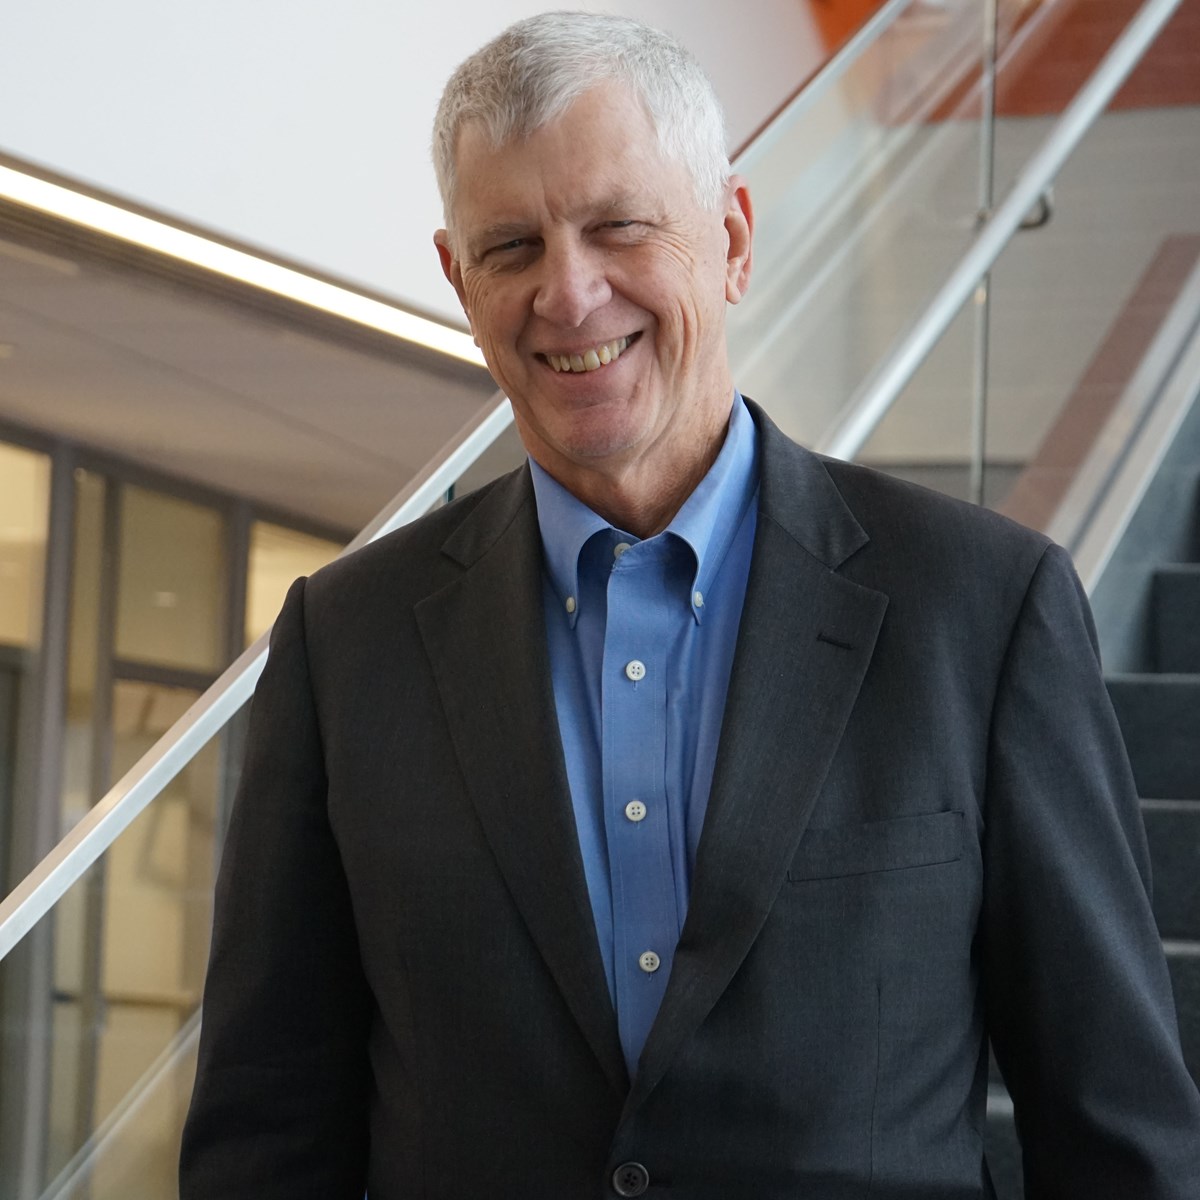 Jack M. Wilson is a President Emeritus / University Distinguished Professor of Higher Education, Emerging Technologies, & Innovation in the Manning School of Business at UMass Lowell.